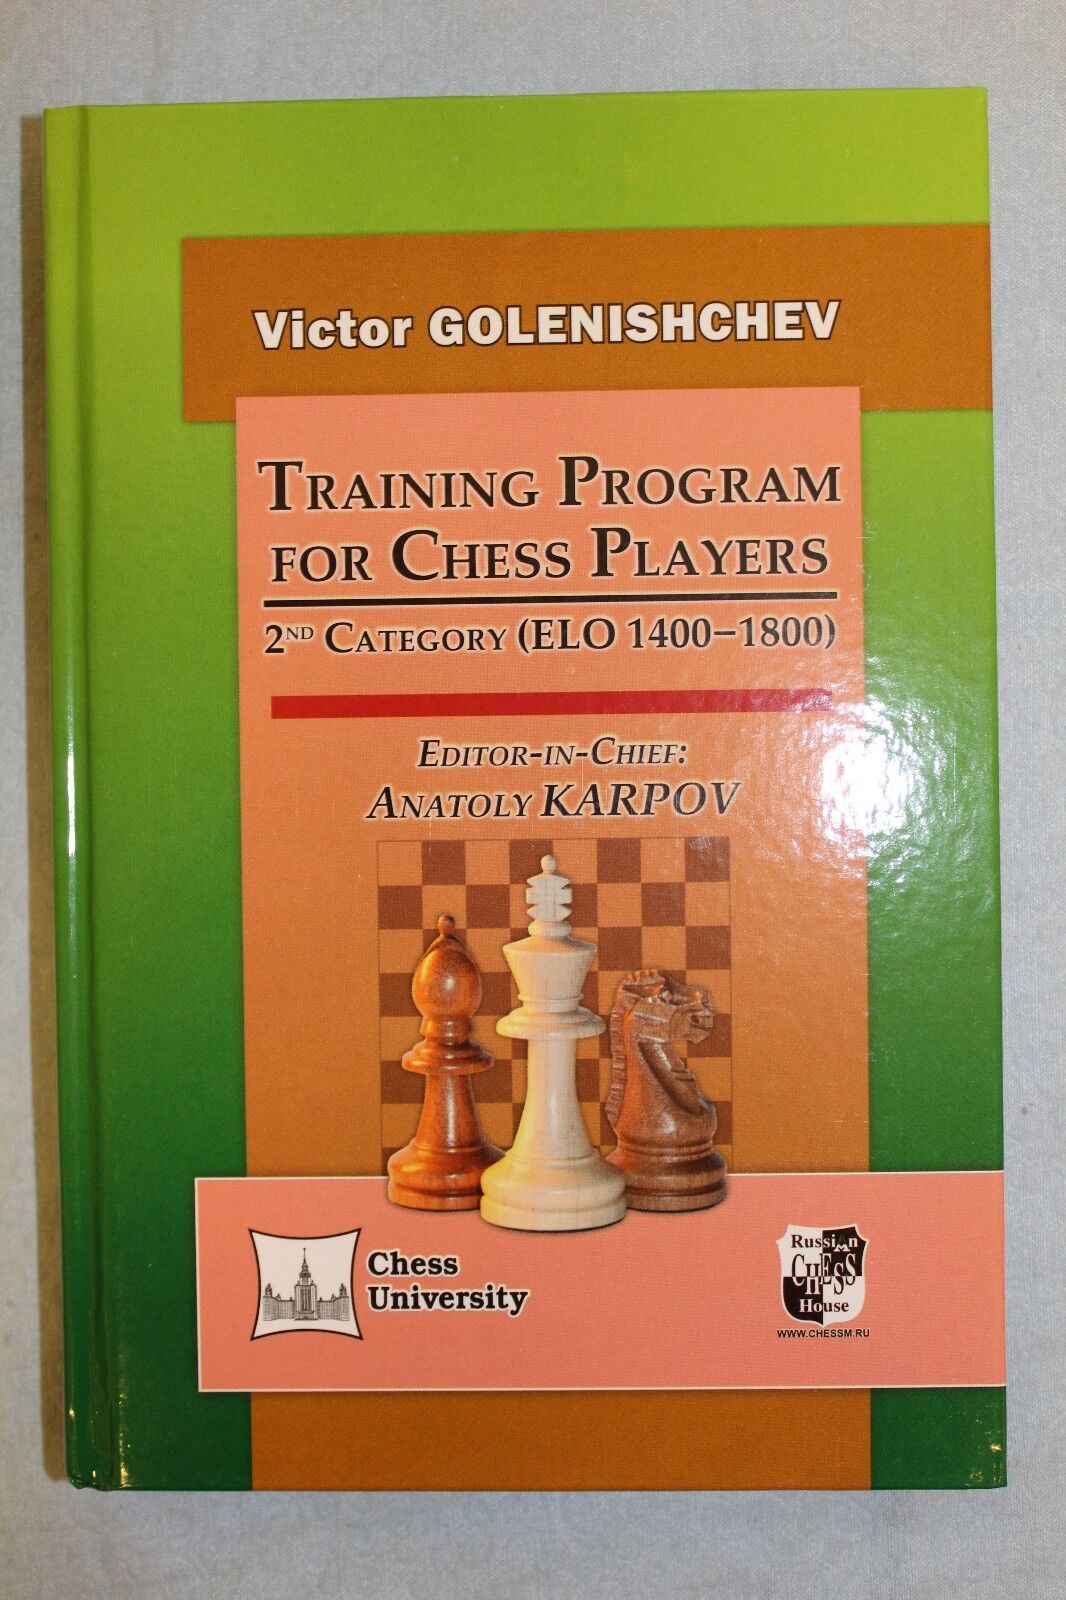 The Best Chess Games (Part 2), PDF, Chess Competitions